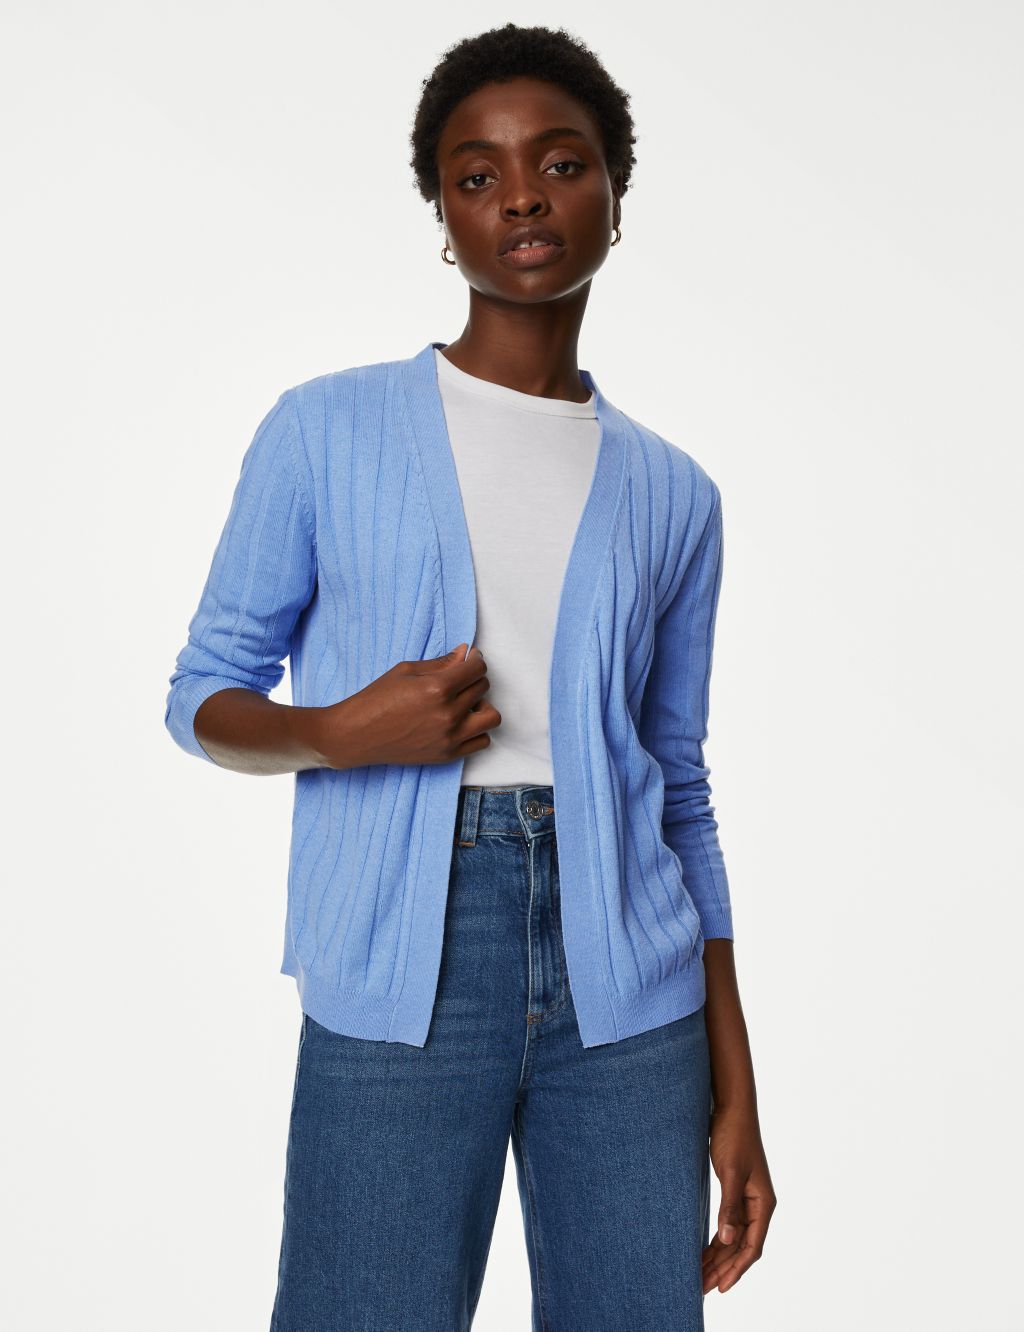 Edge to Edge Relaxed Cardigan with Linen image 1